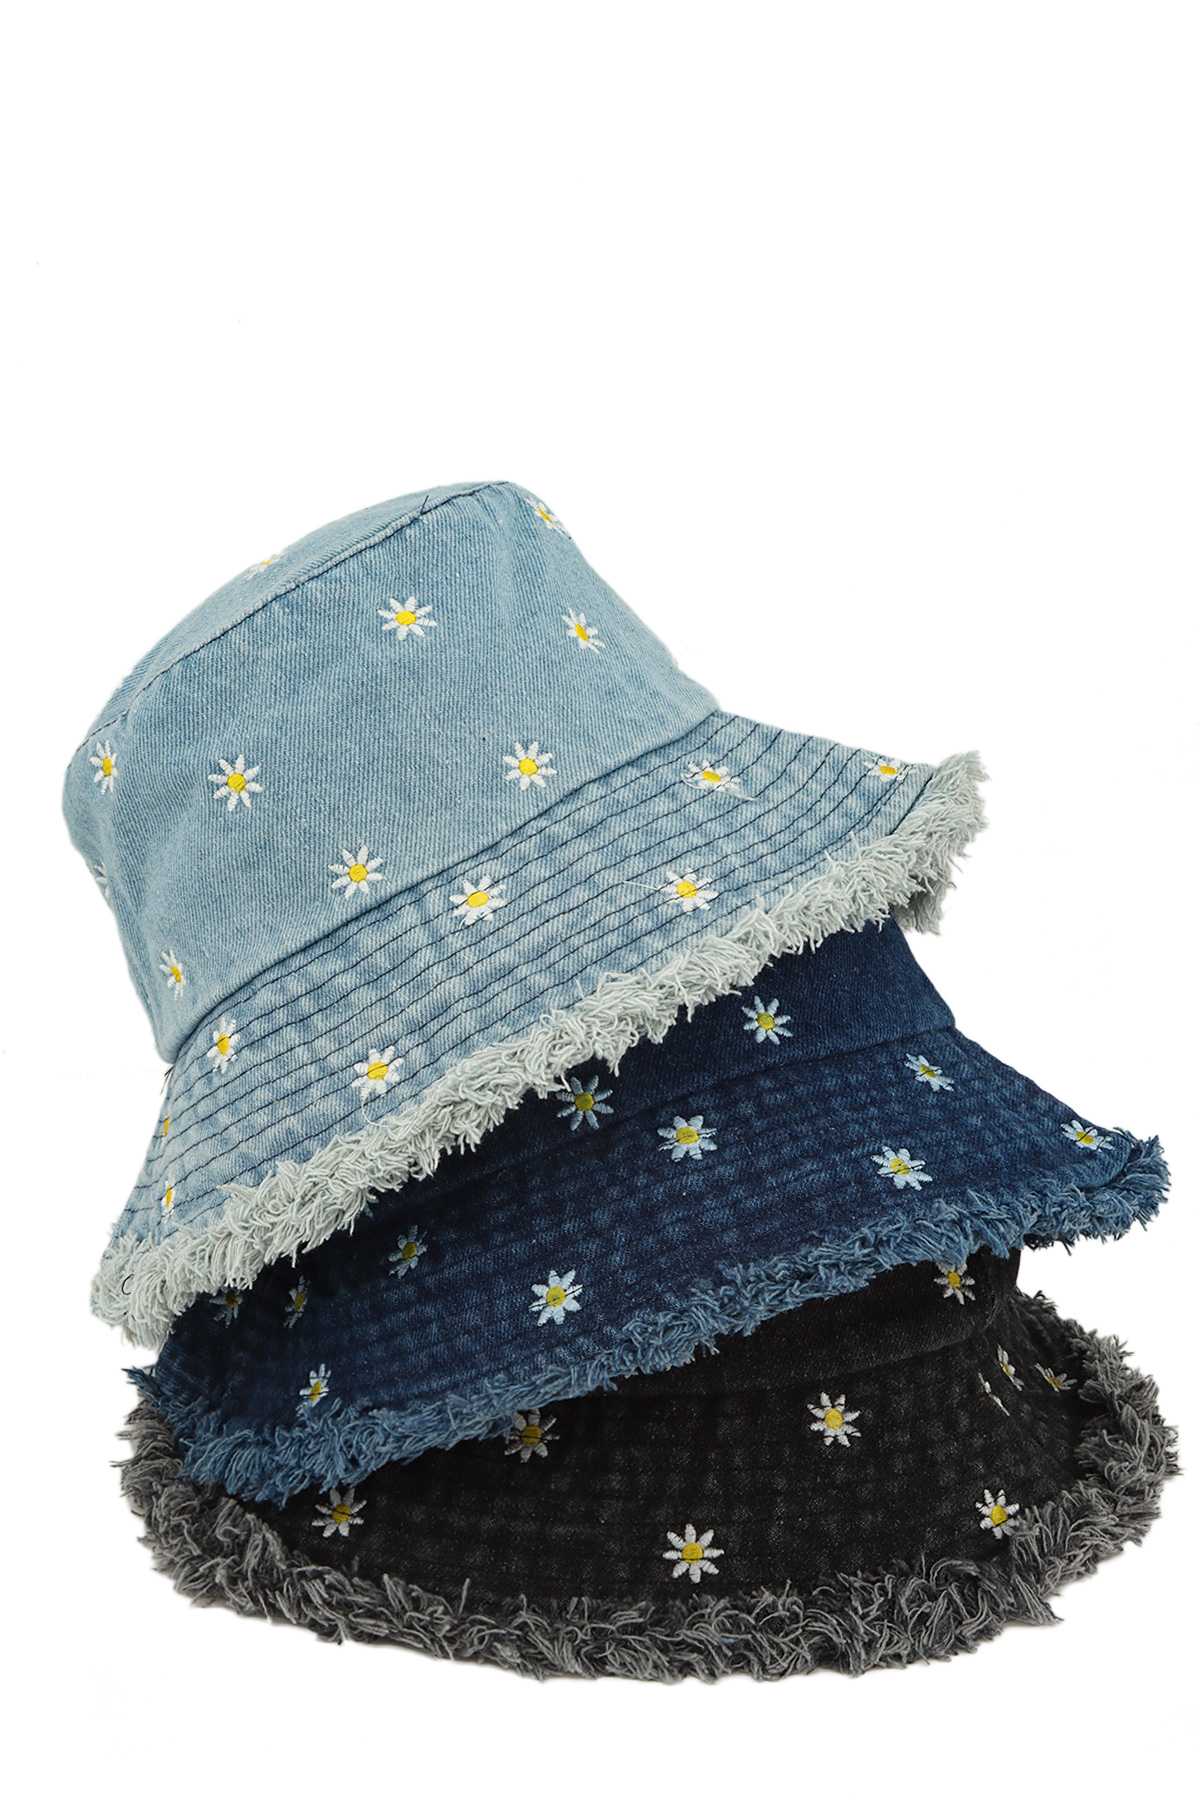 Flower Embroidery Denim Bucket Hat with Distressed Edge